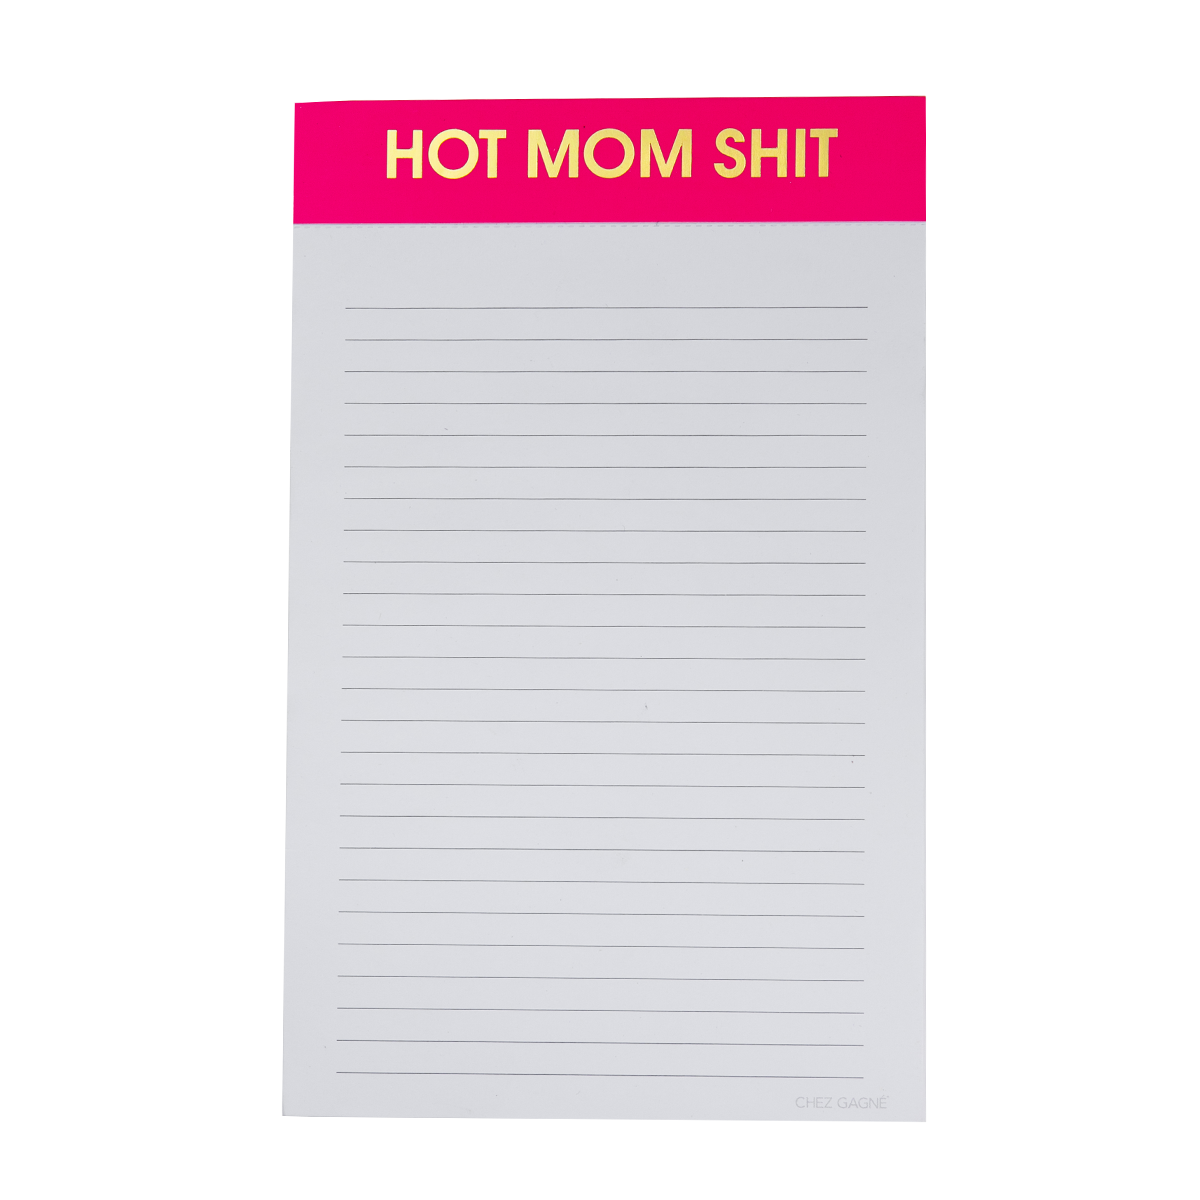 Hot Mom Shit - Lined Notepad